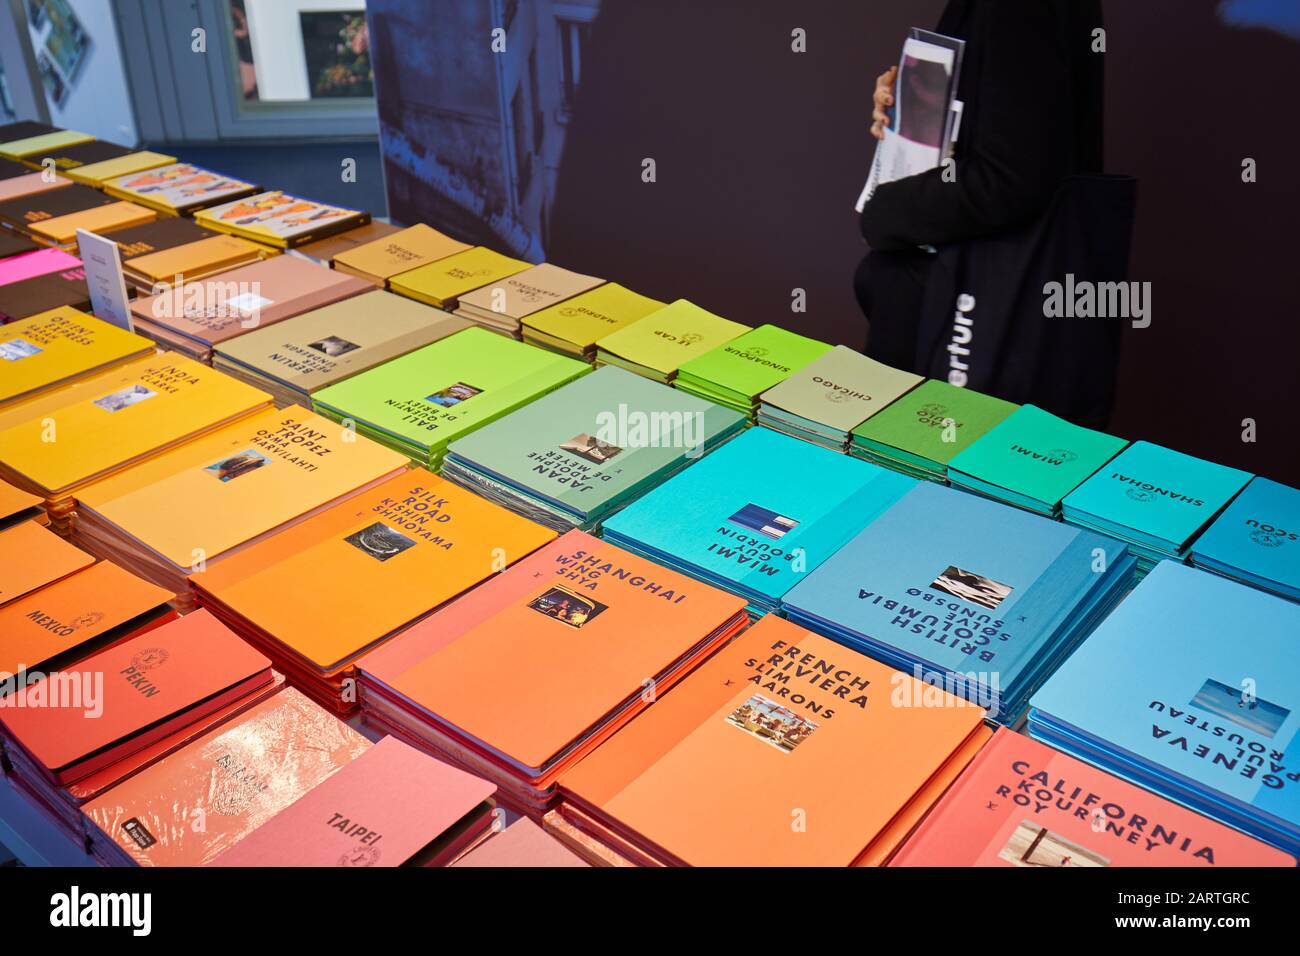 Louis Vuitton pop-up bookstore at the Grand Palais in Paris from